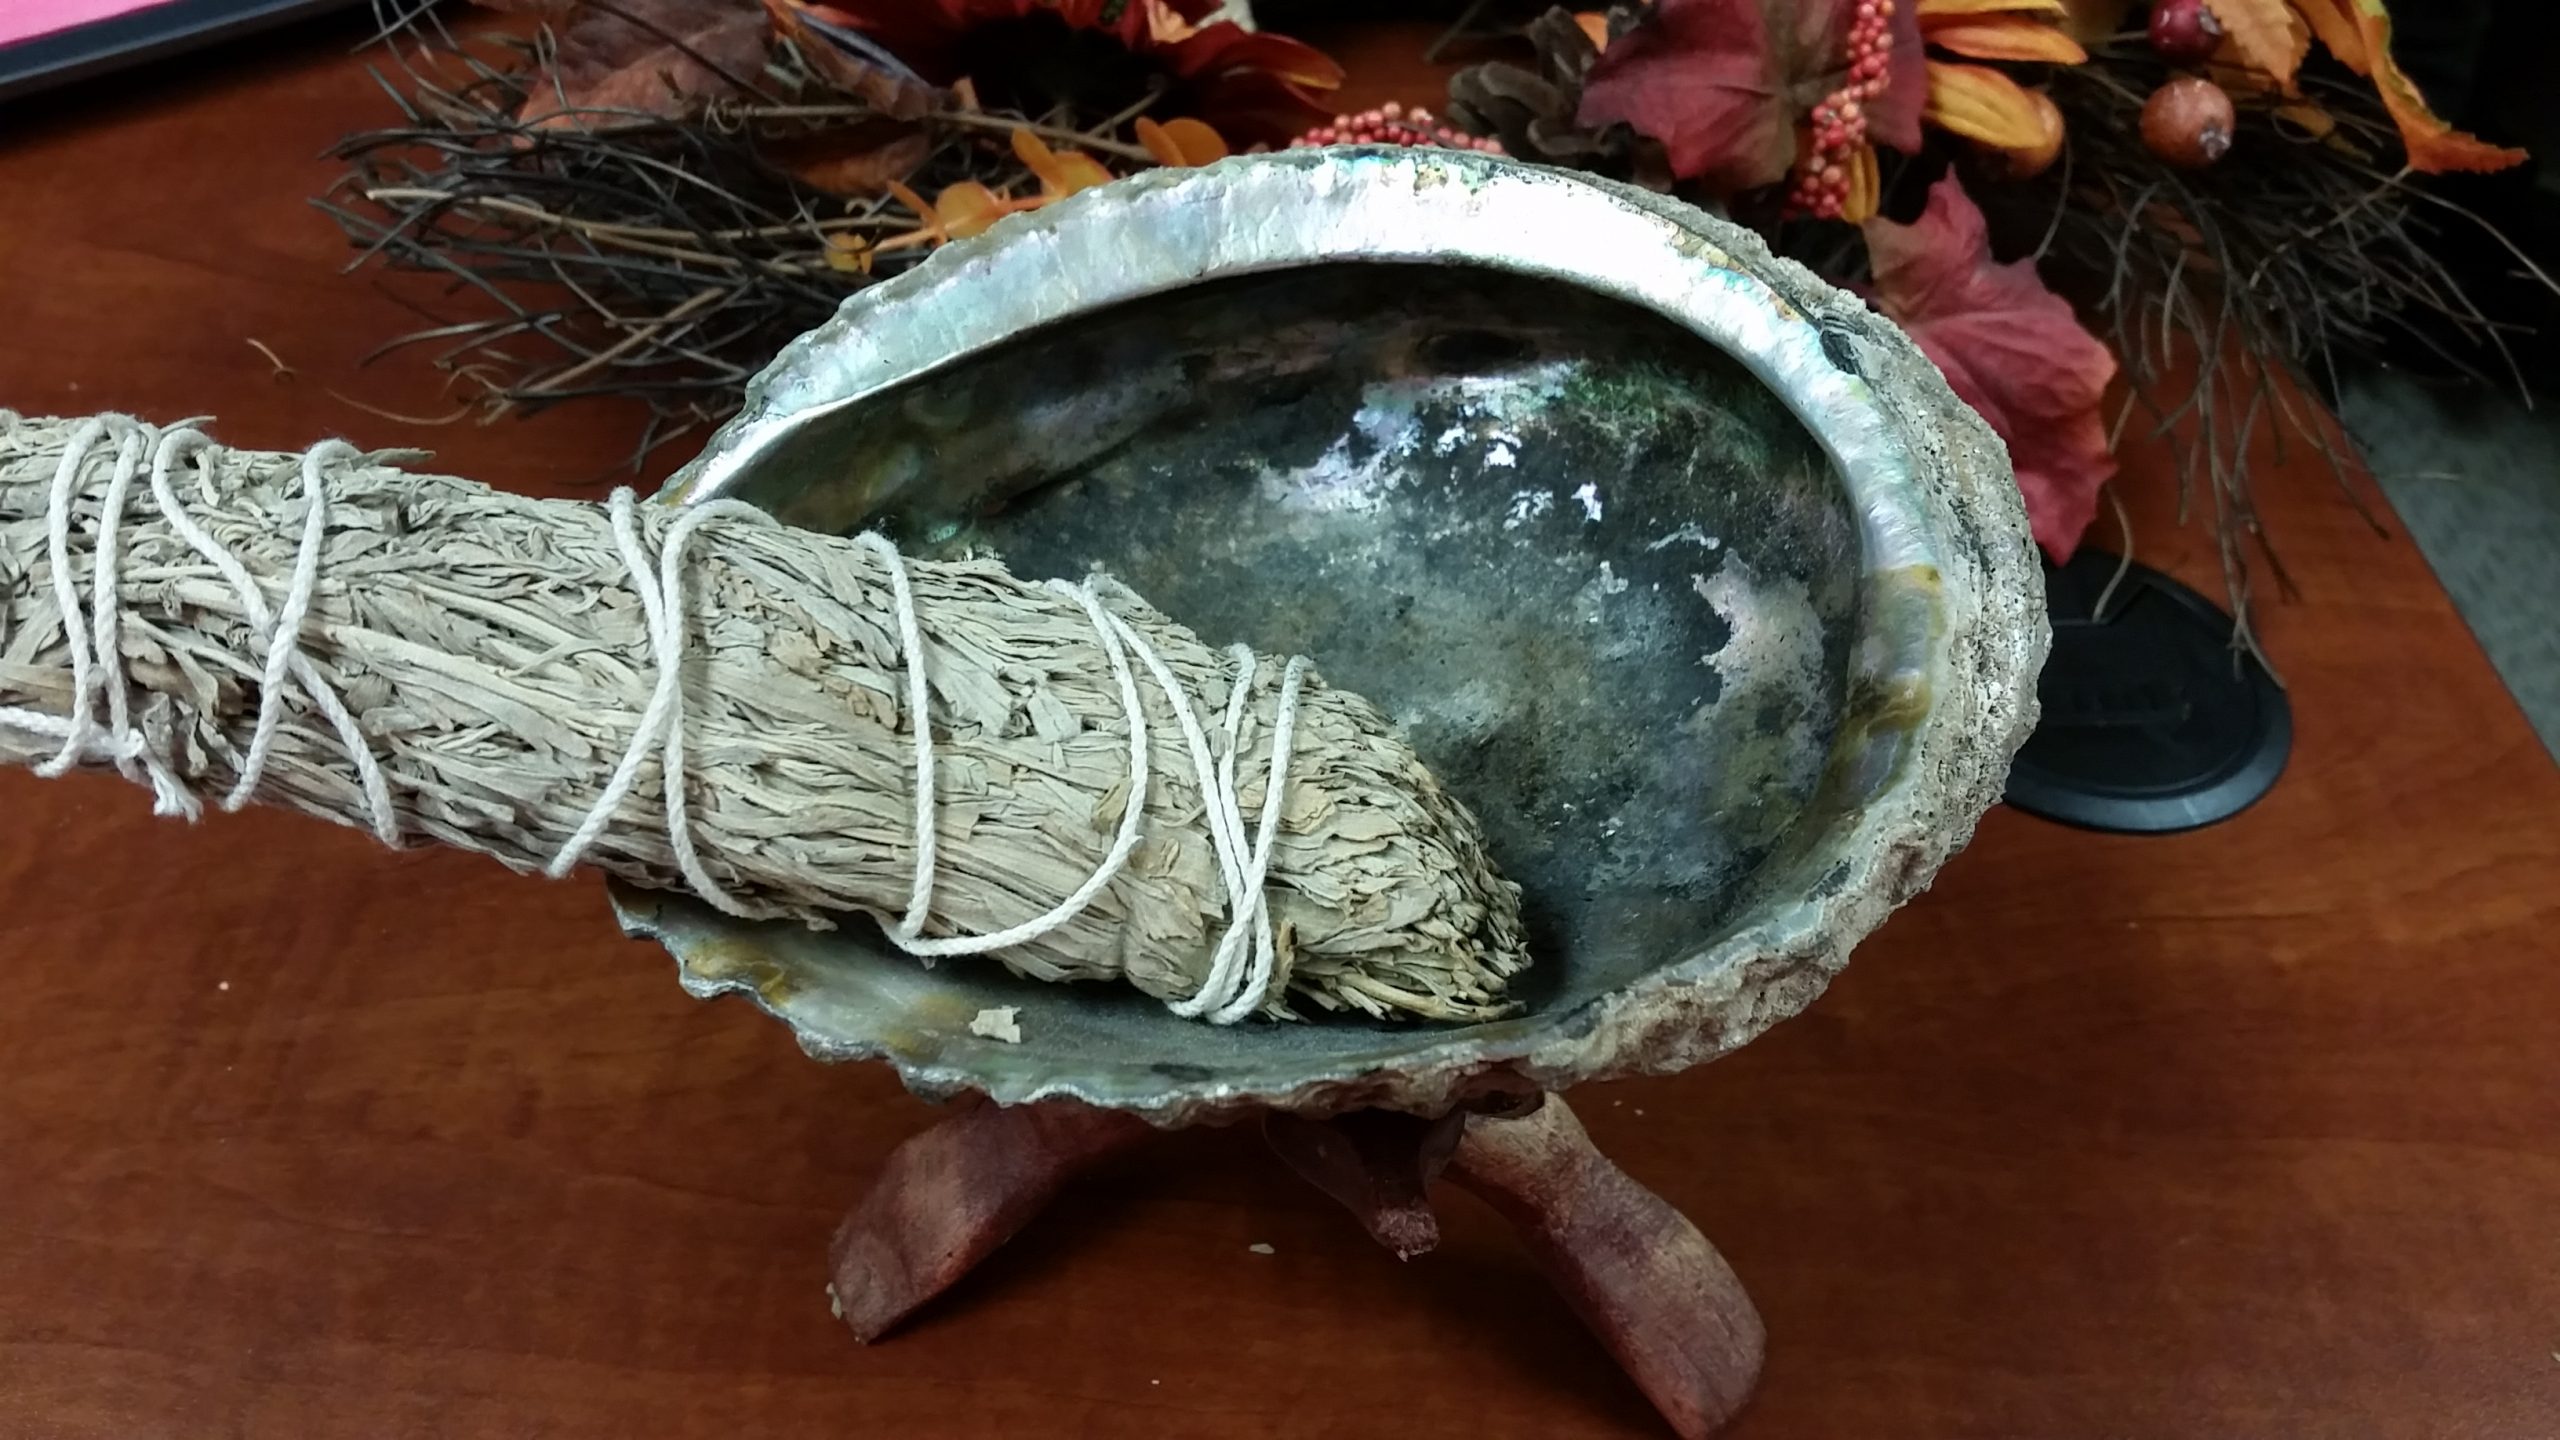 Anishinaabe Culture smudging with sage